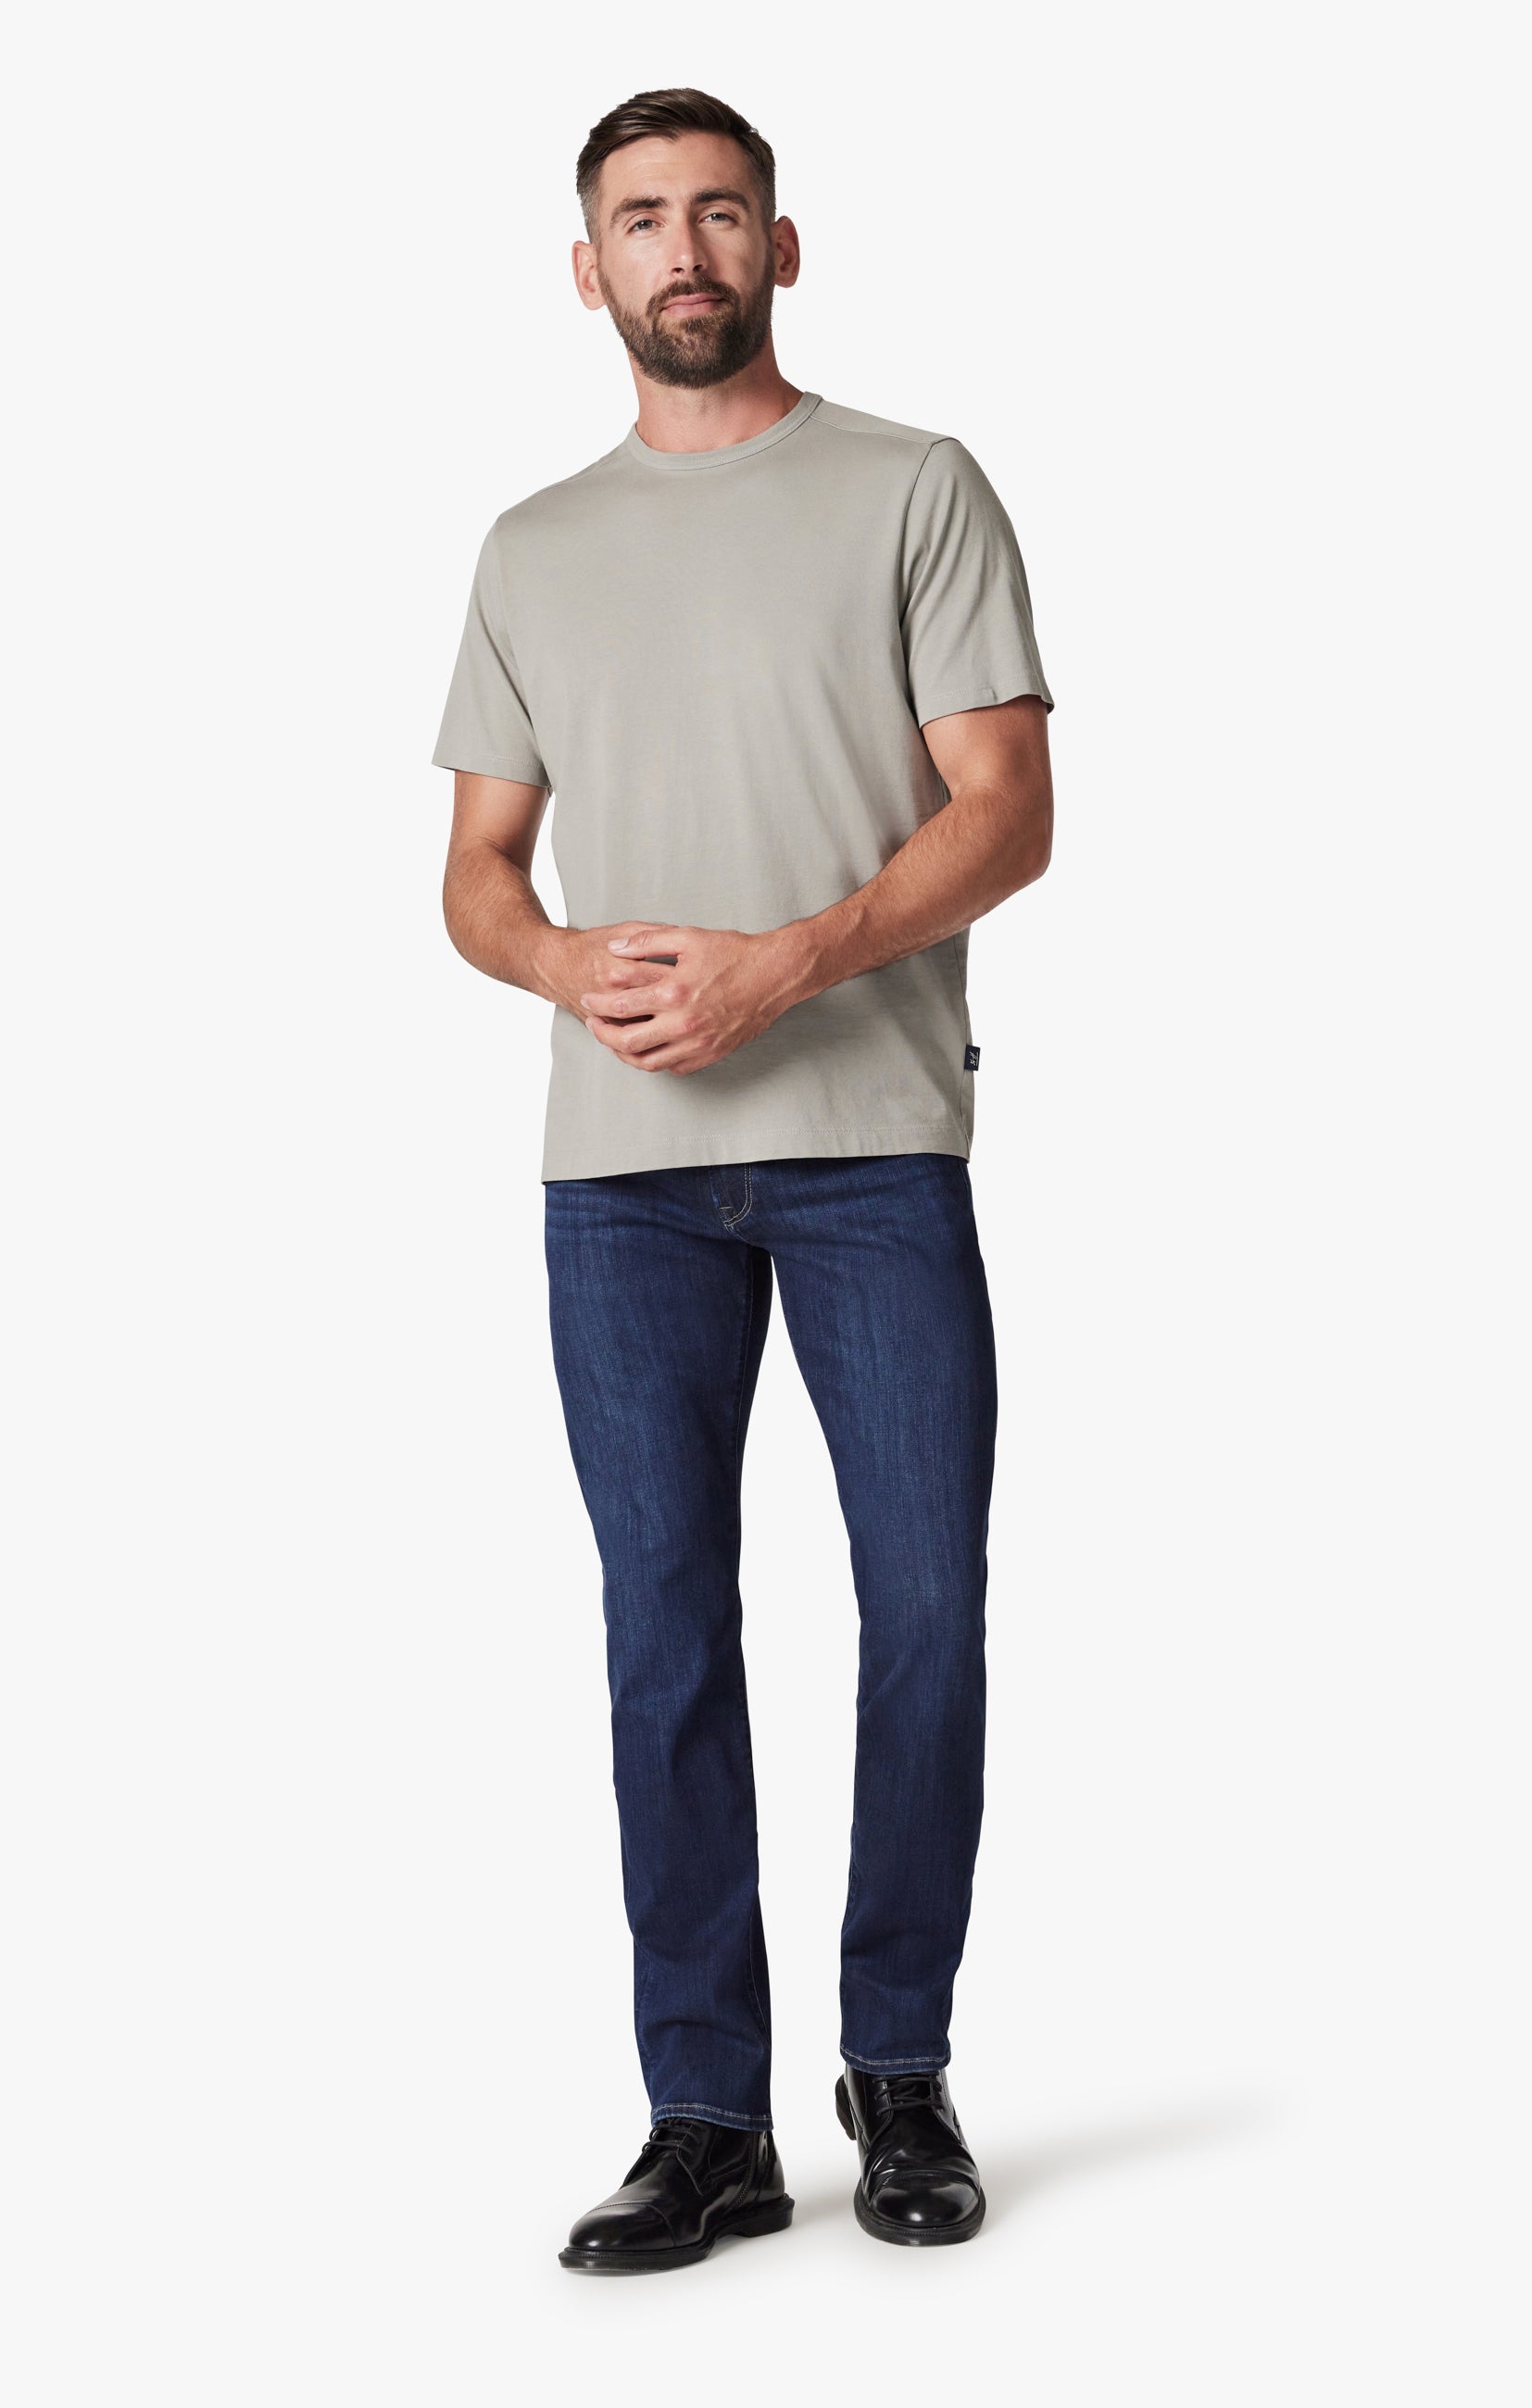 Champ Athletic Fit Jeans in Dark Brushed Refined Image 1